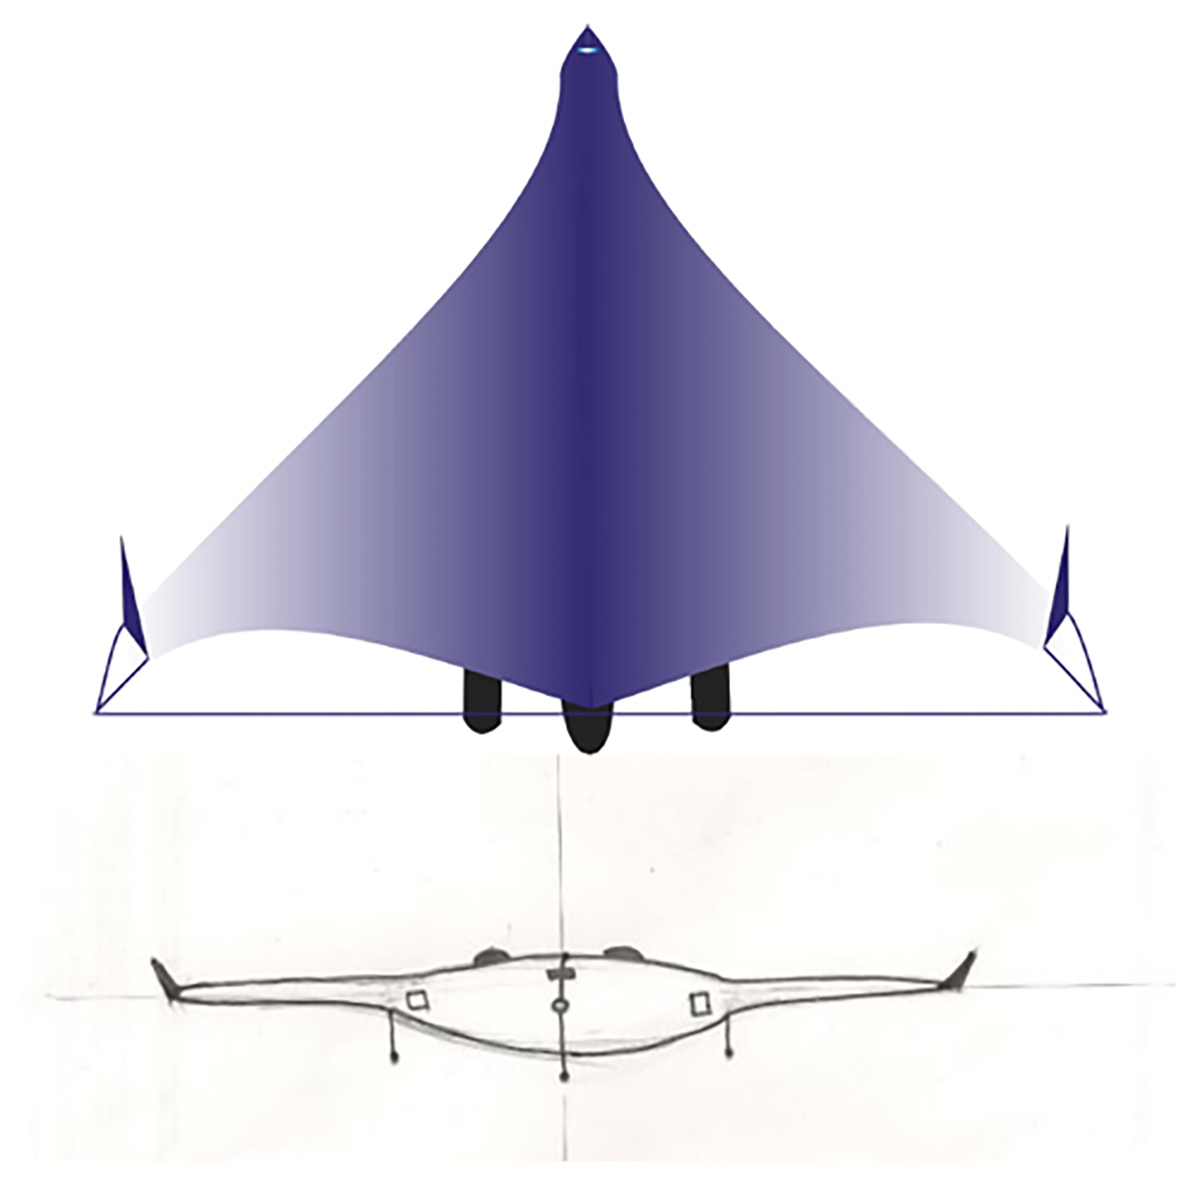 Artist computer generated concept of the Paperwing aircraft.